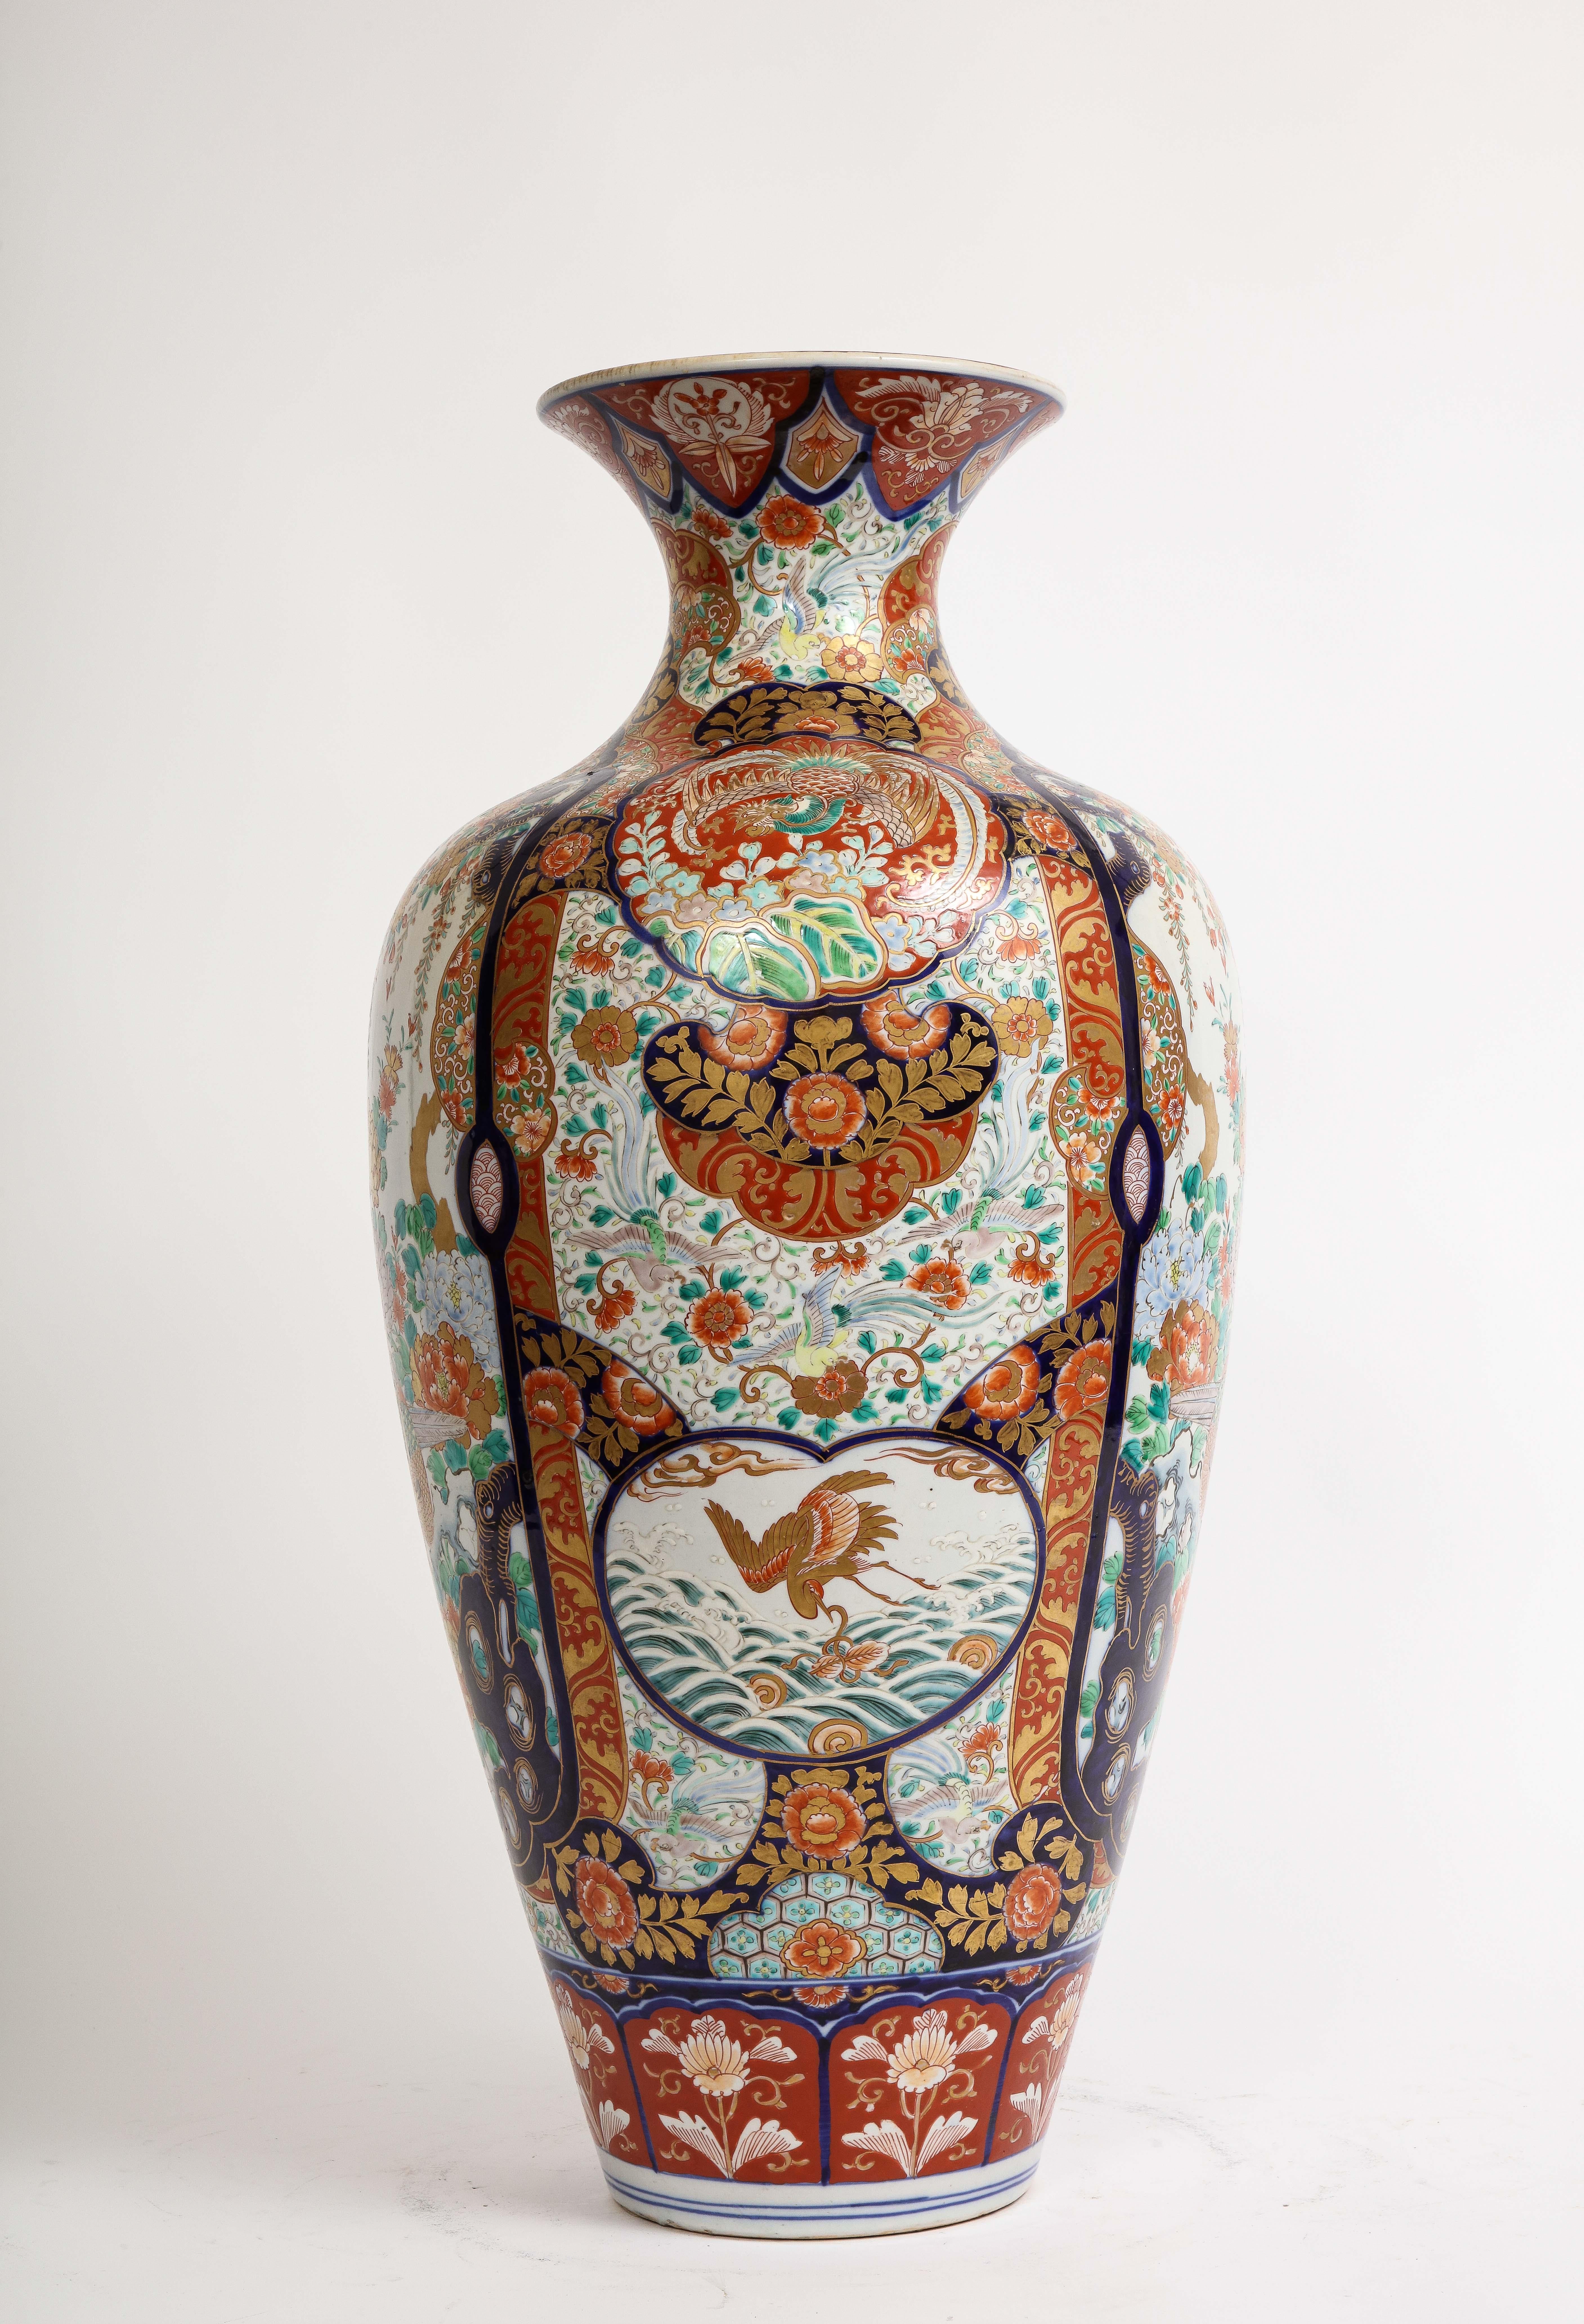 Large Japanese Imari Porcelain Vase, Meiji Period, Circa 1880

An exceptional Japanese Imari porcelain vase stands tall at an impressive 29 inches in height, dating back to the 1880s.

The front panel of this masterpiece showcases a captivating